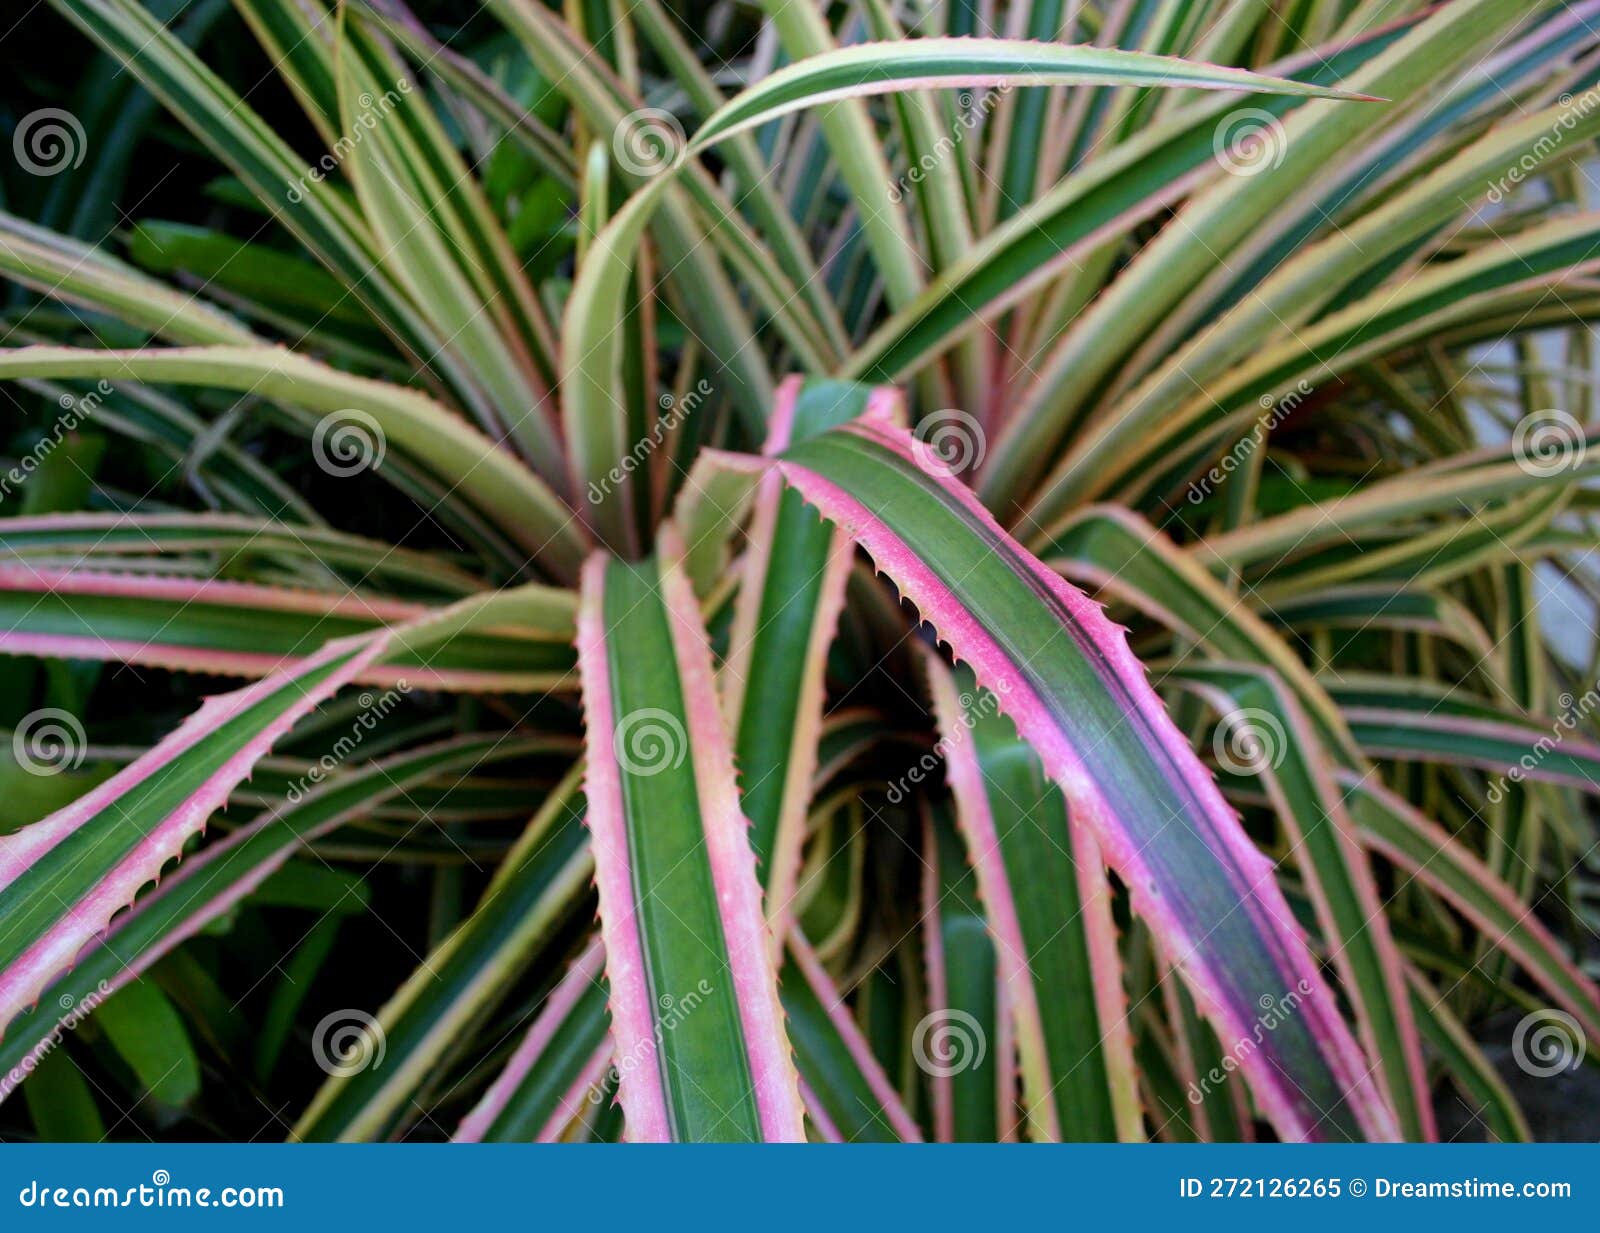 beautiful image of anana leaf with pink border